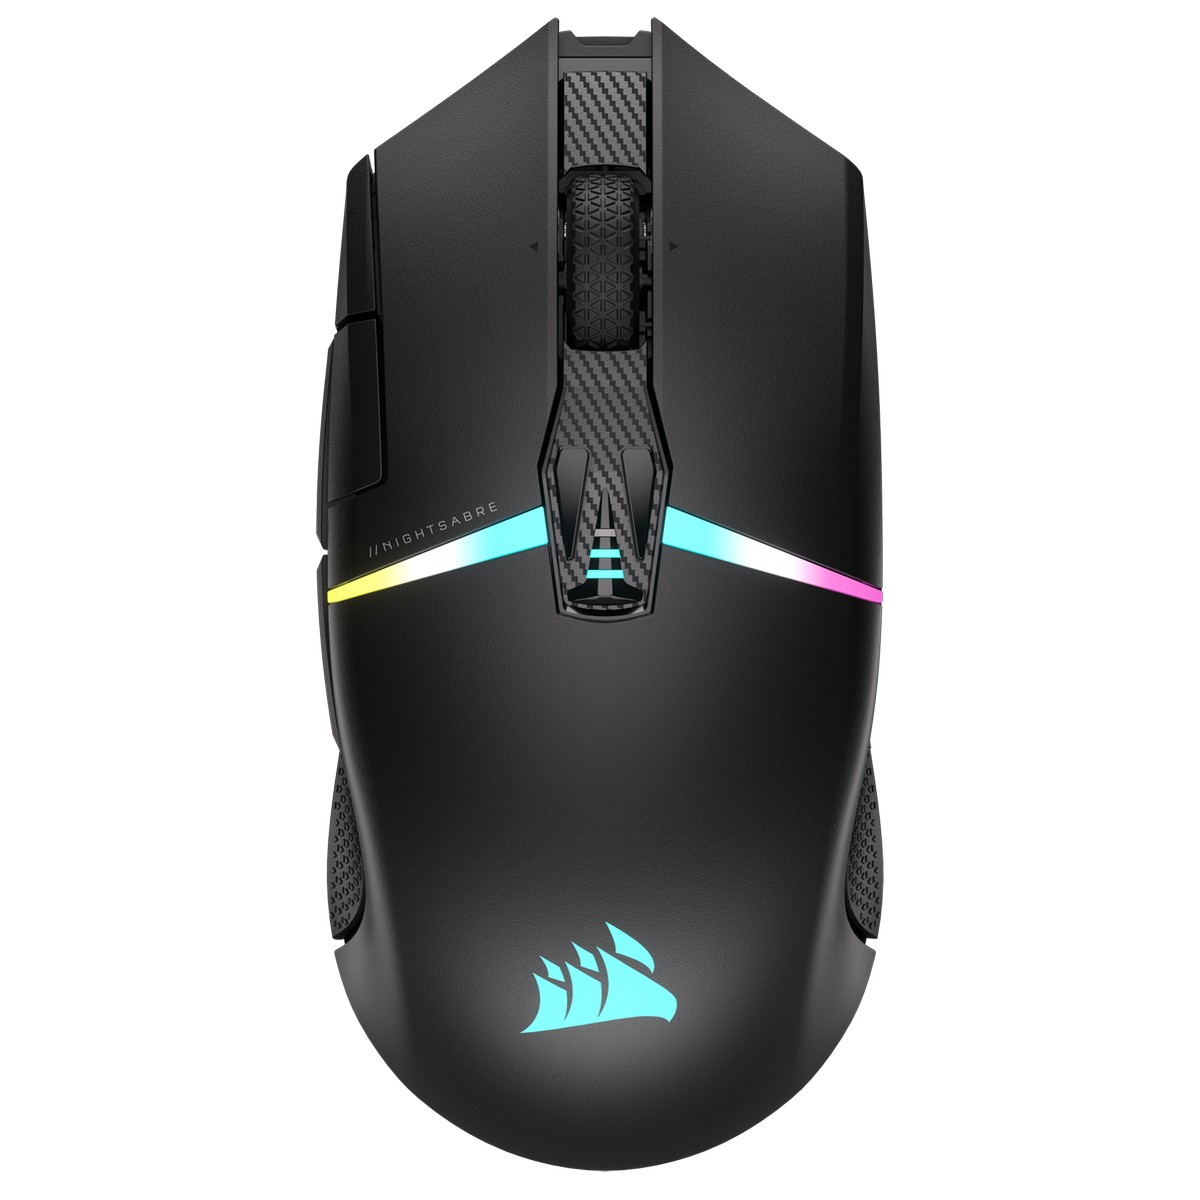 Corsair NIGHTSABRE WIRELESS RGB Optical Gaming Mouse